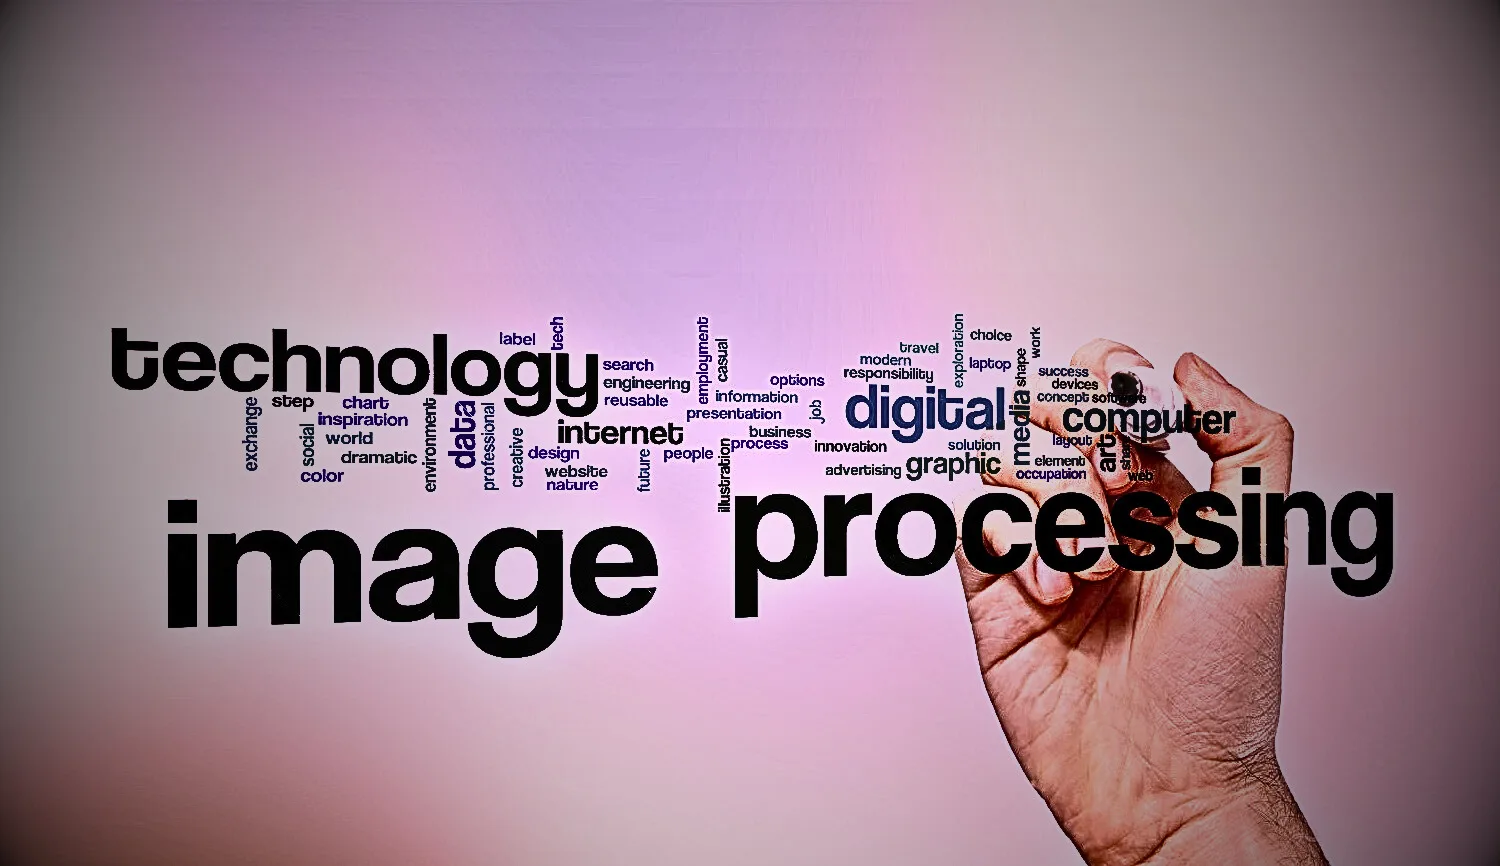 10 processing steps of Digital Image Processing: A Learning Tutorial with best examples